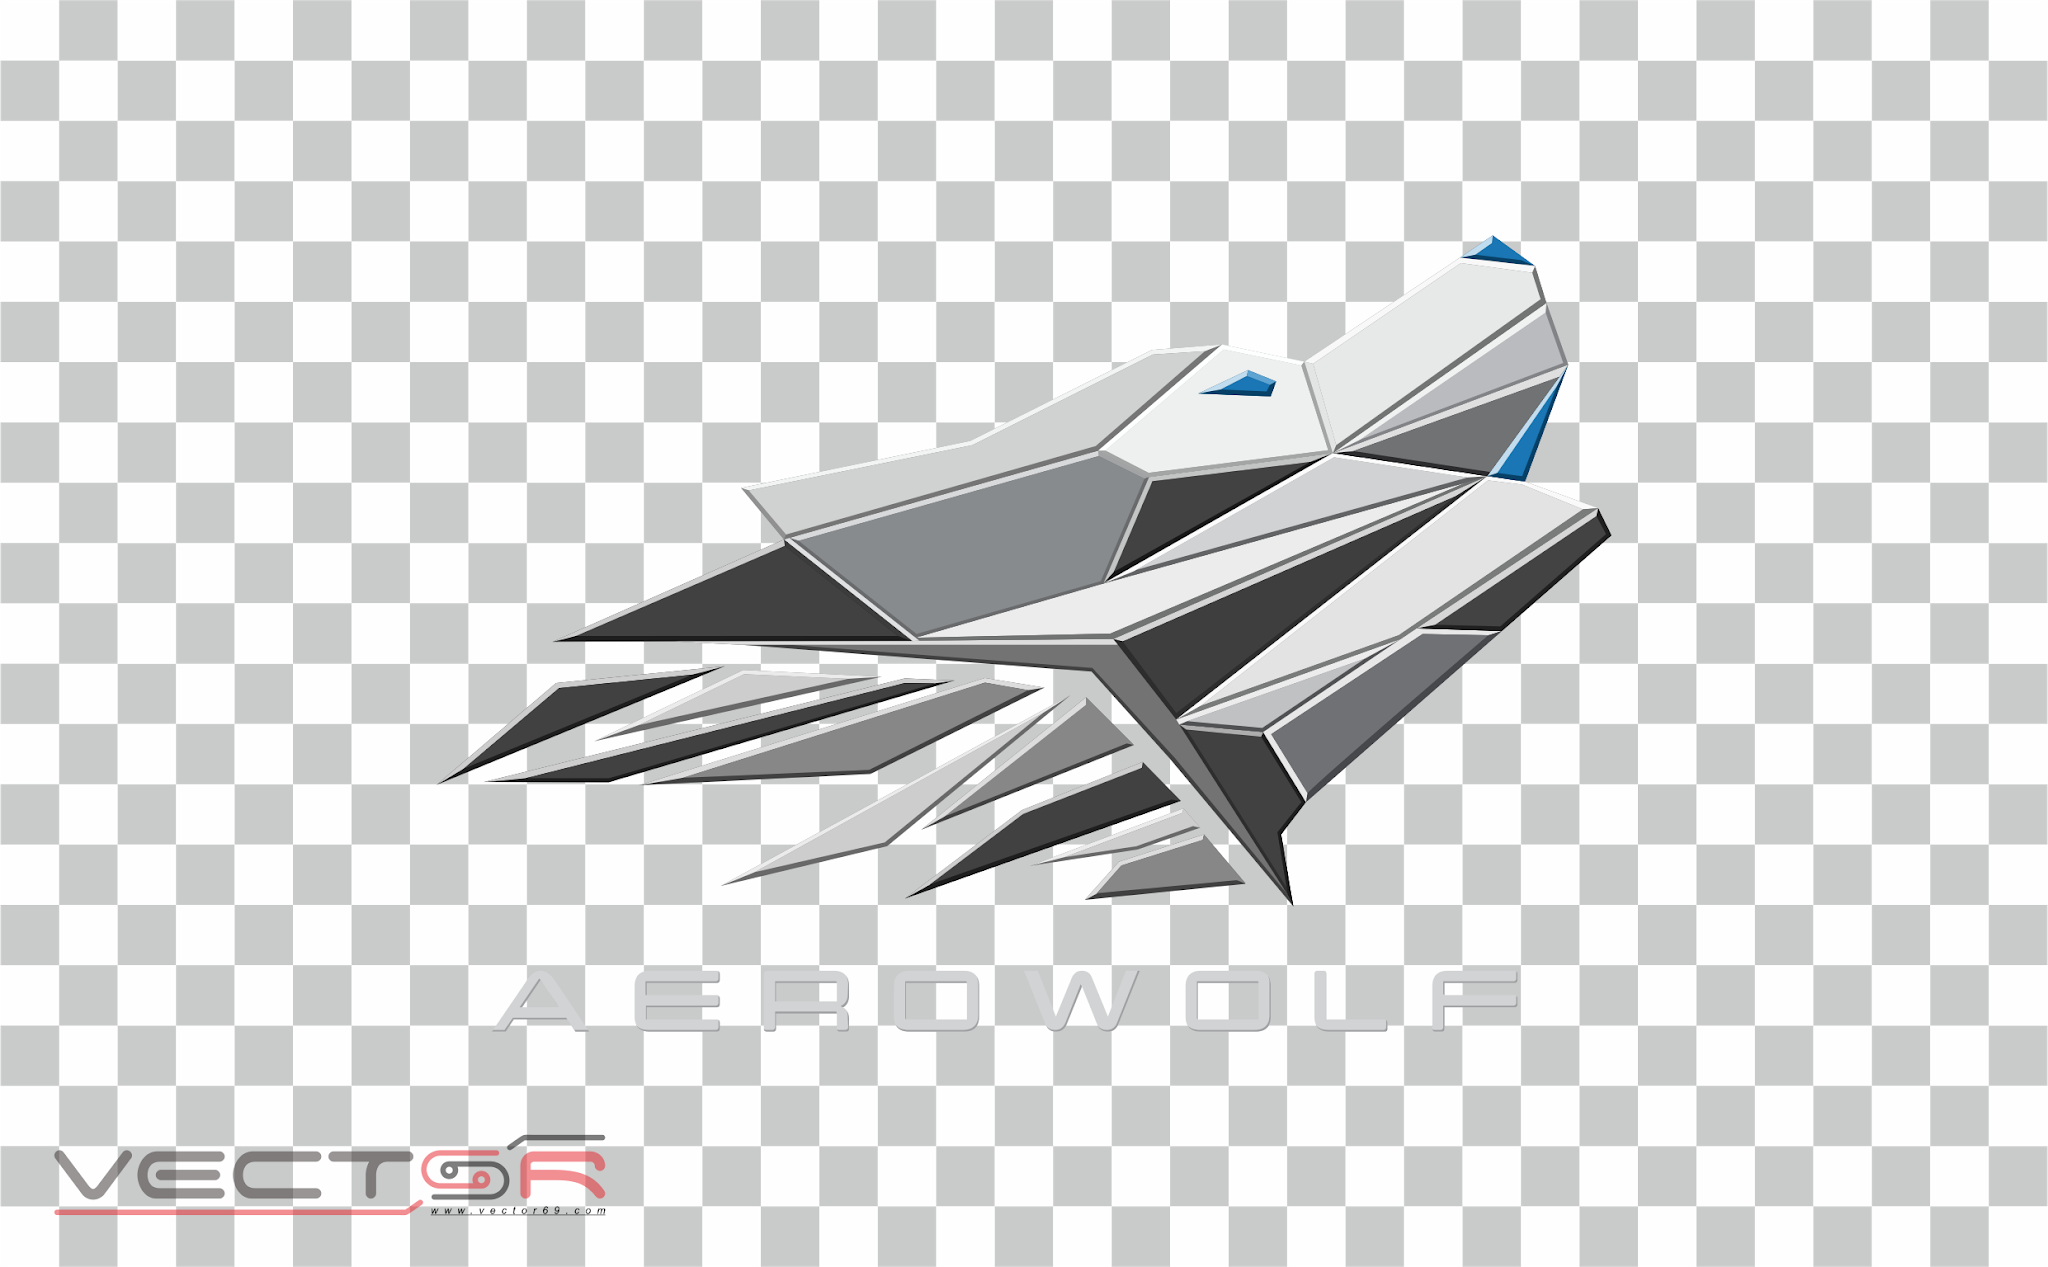 Aerowolf Pro Team Logo - Download Vector File PNG (Portable Network Graphics)